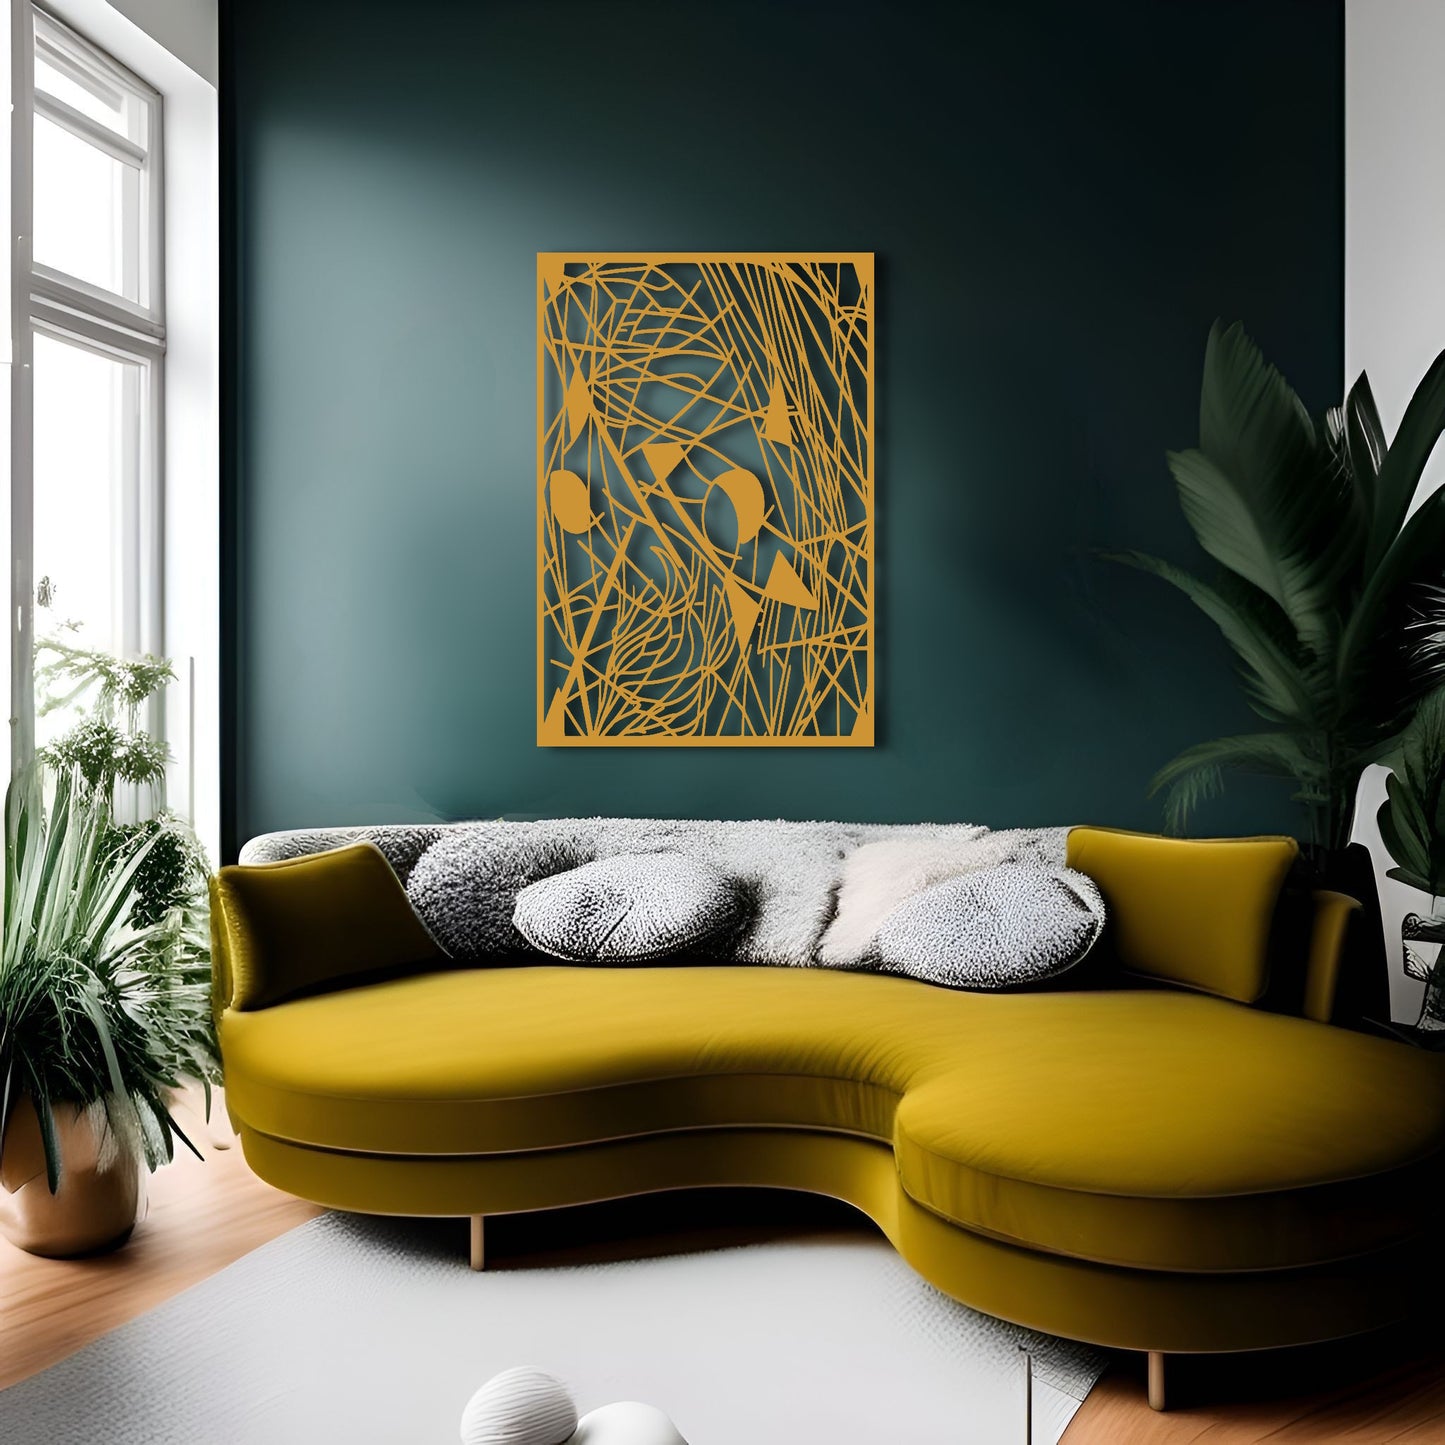 Lyrical Abstraction - Abstract Geometric Metal Wall Art